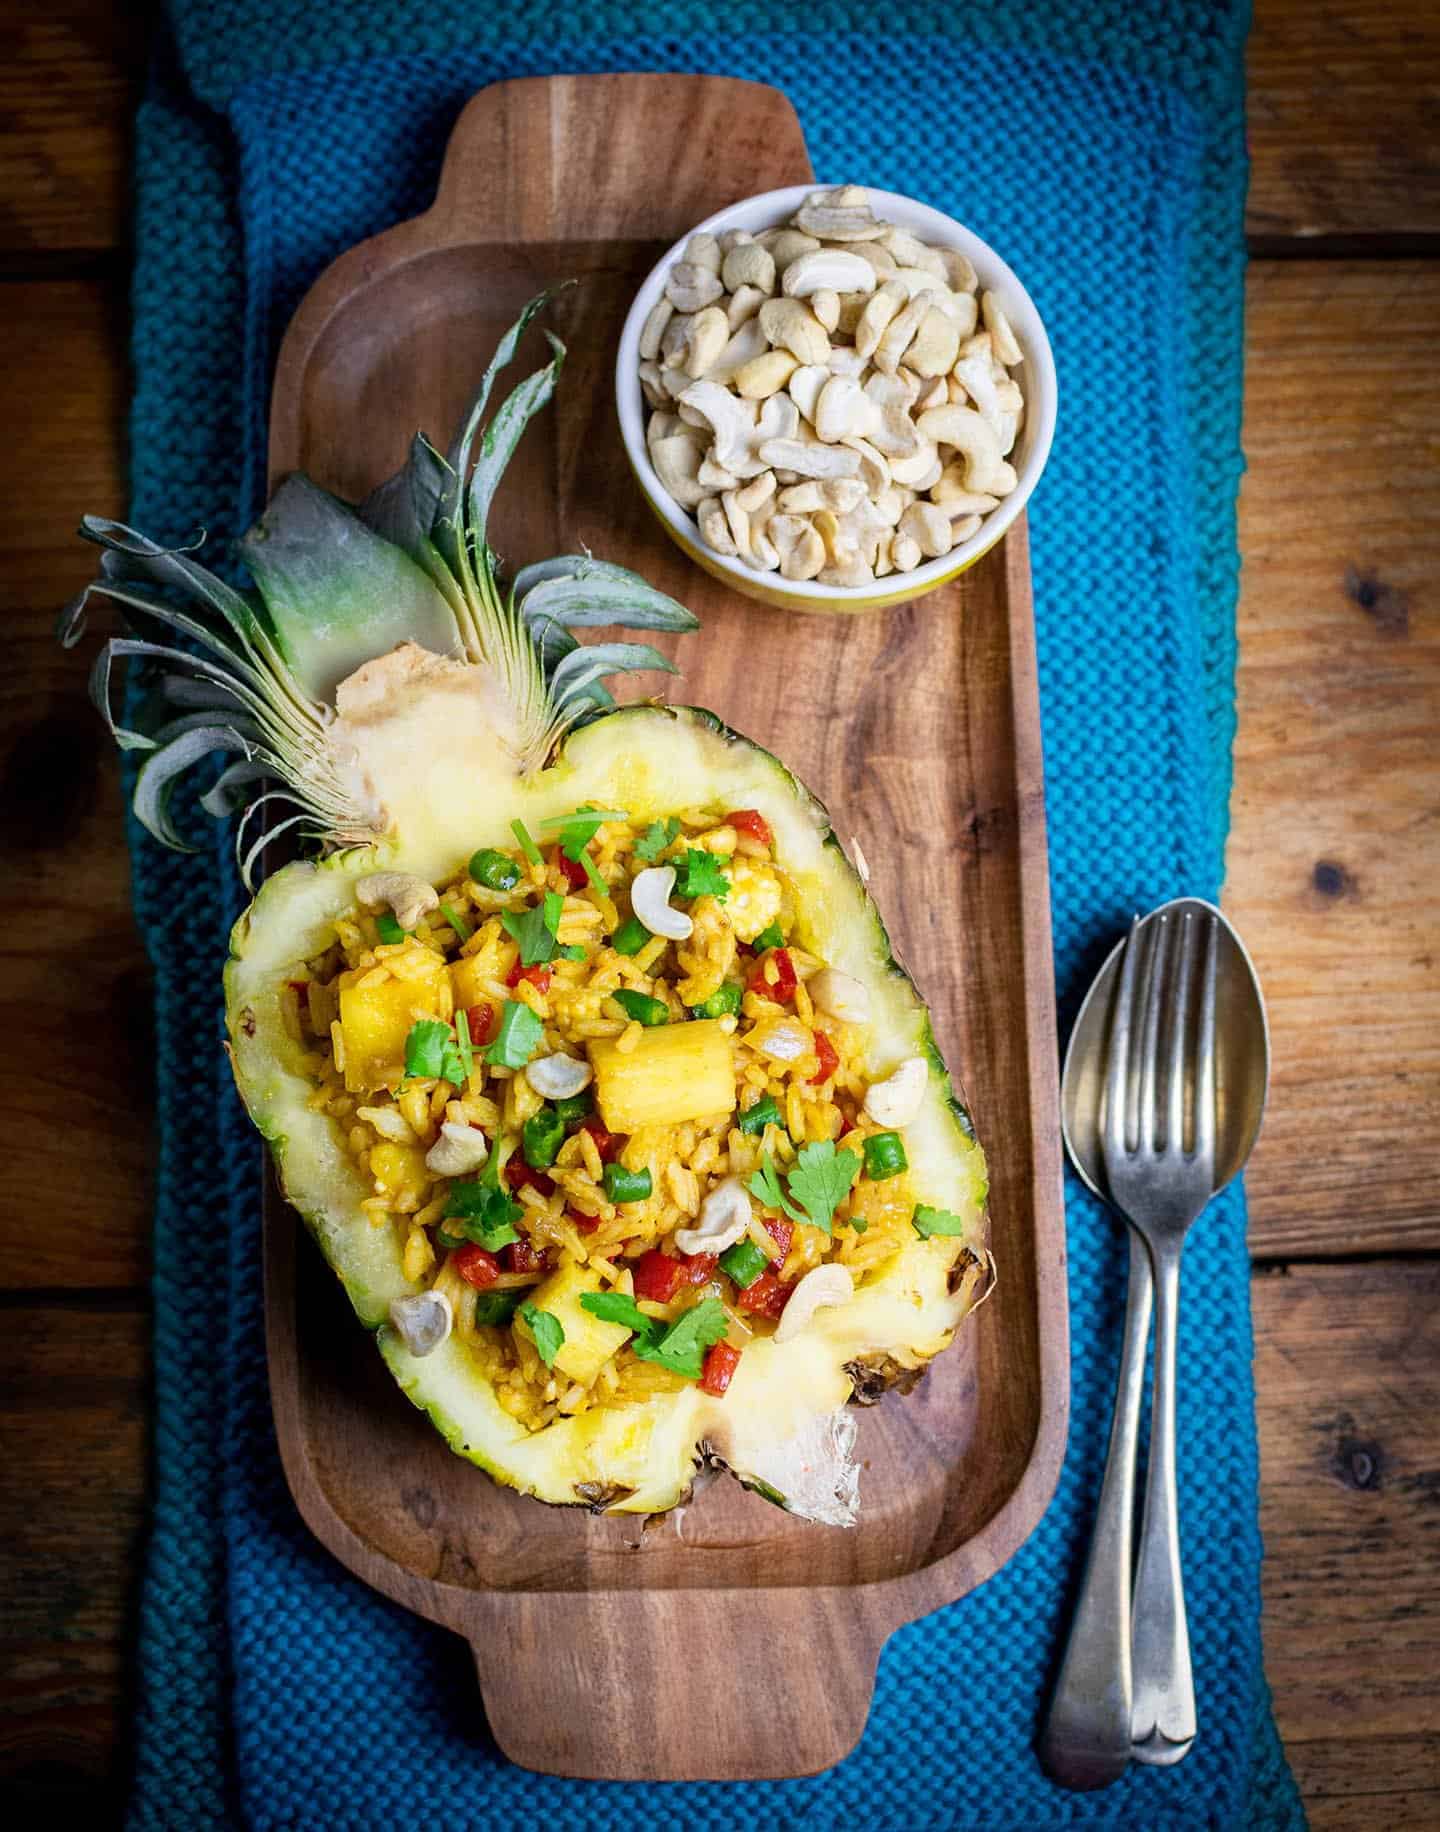 A hollowed out half pineapple filled with rice, Cashews in a bowl next to it, with cutlery to the right of the pineapple and a blue cloth underneath it